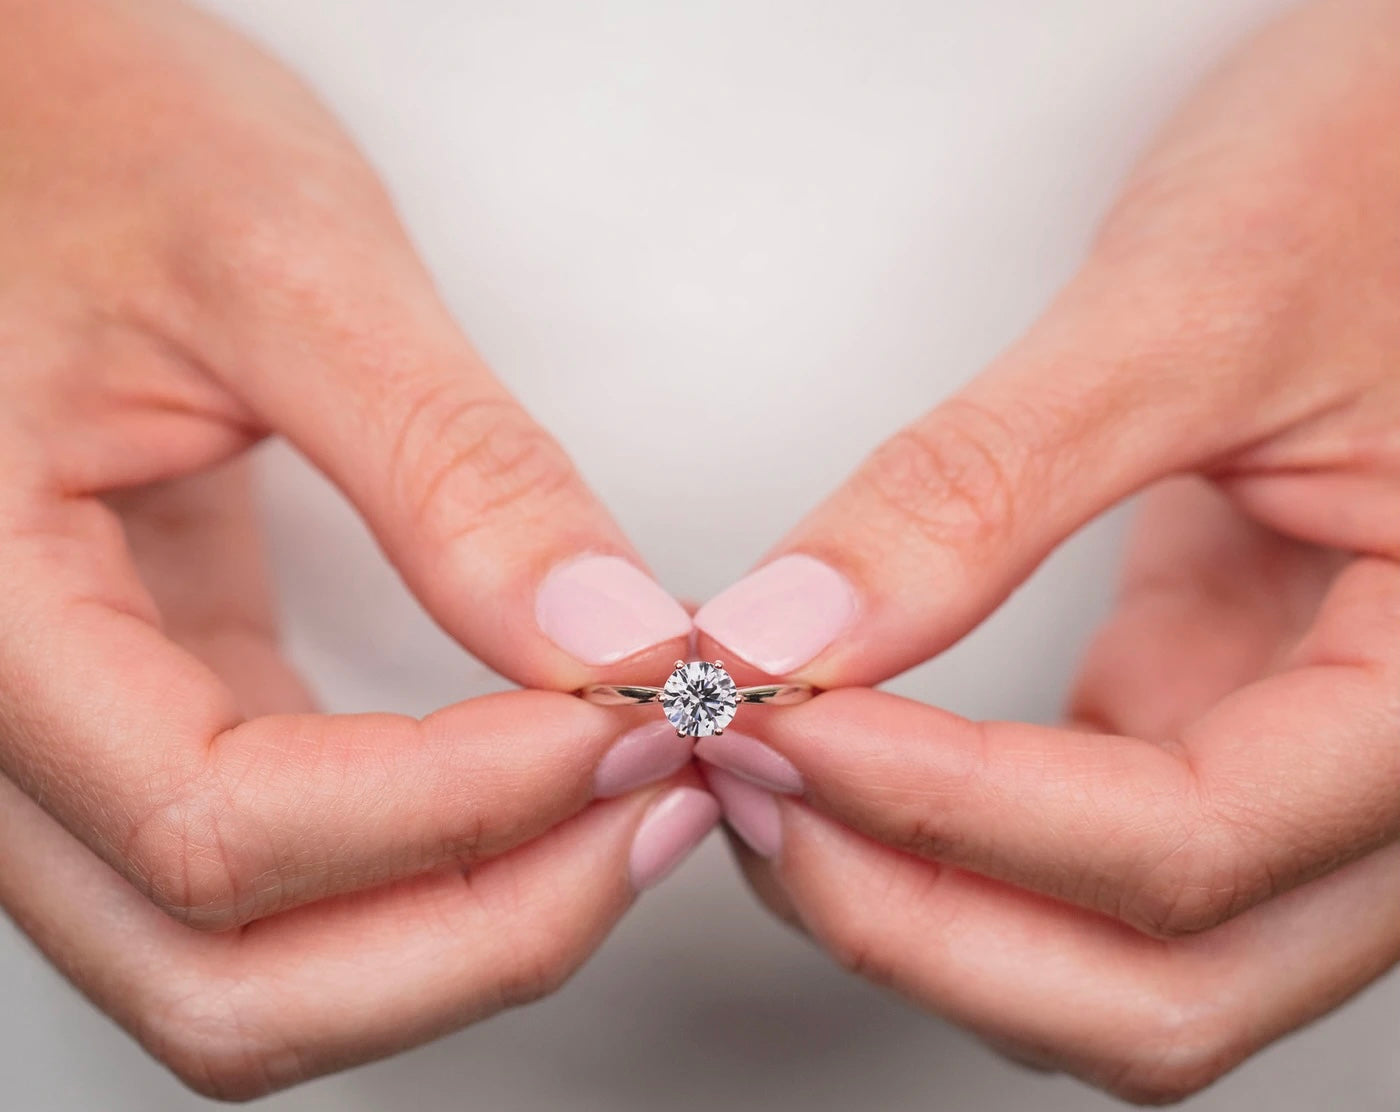 Worried About the Longevity and Durability of Moissanite? DON'T BE!